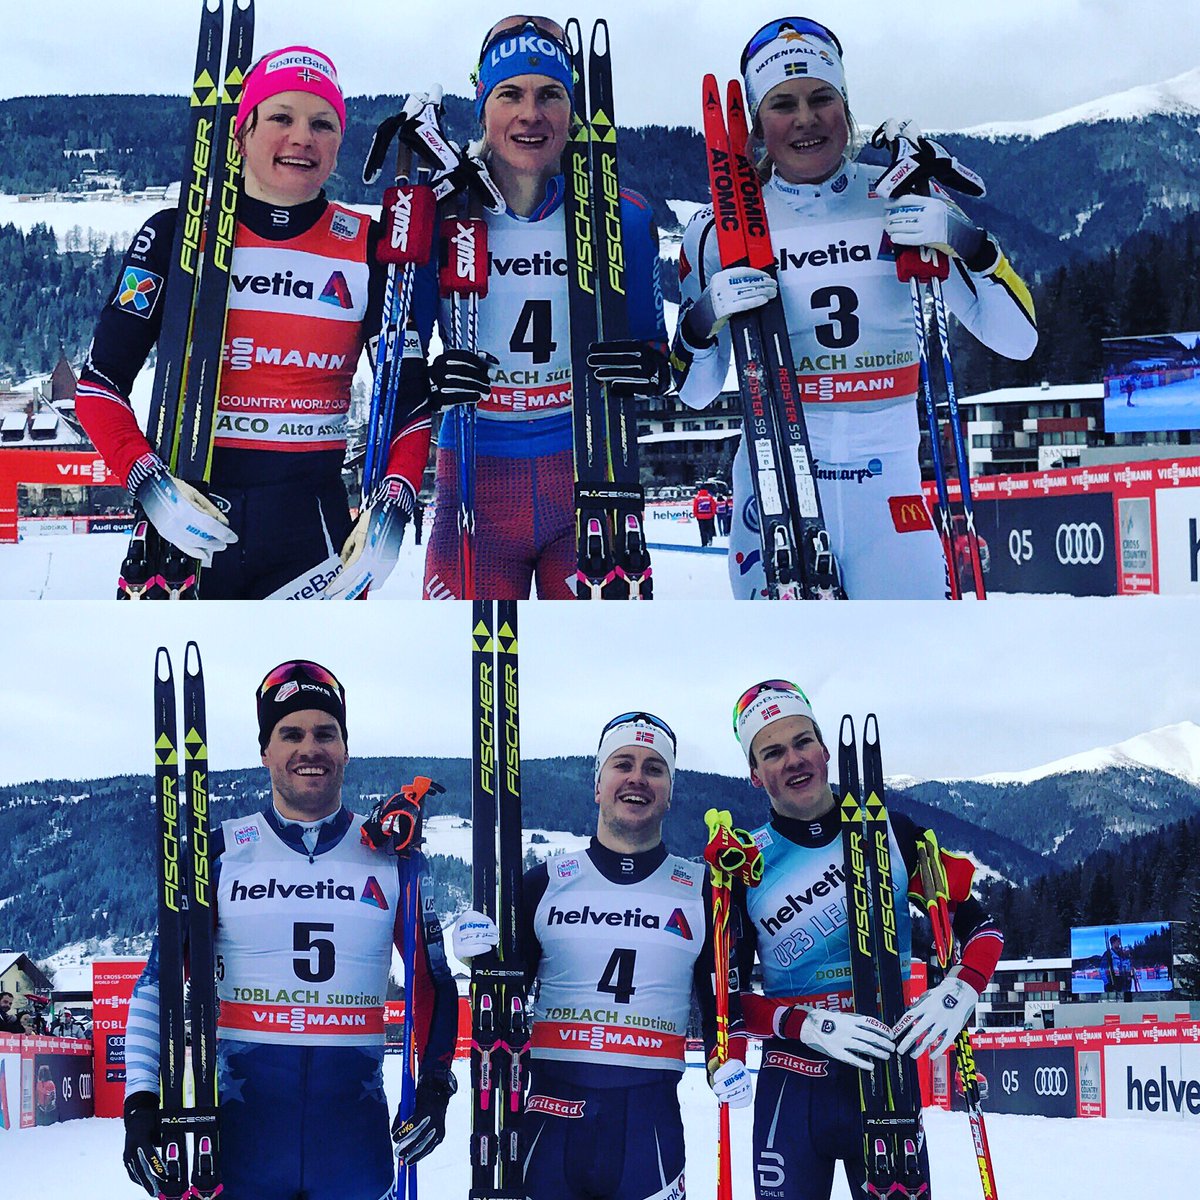 The women's (top) and men's (bottom) podiums at the World Cup 1.3 k freestyle sprints on Saturday in Toblach, Italy. Russia's Natalia Matveeva (top center) won the women's final, ahead of Norway's Maiken Caspersen Falla (top left) and Hanna Falk (top right). American Simi Hamilton (bottom left) took second in the men's final, behind Norway's Sindre Bjørnestad Skar (bottom center) and ahead of Norway's Johannes Høsflot Klæbo (bottom right) in third. (Photo: FIS Cross Country) 